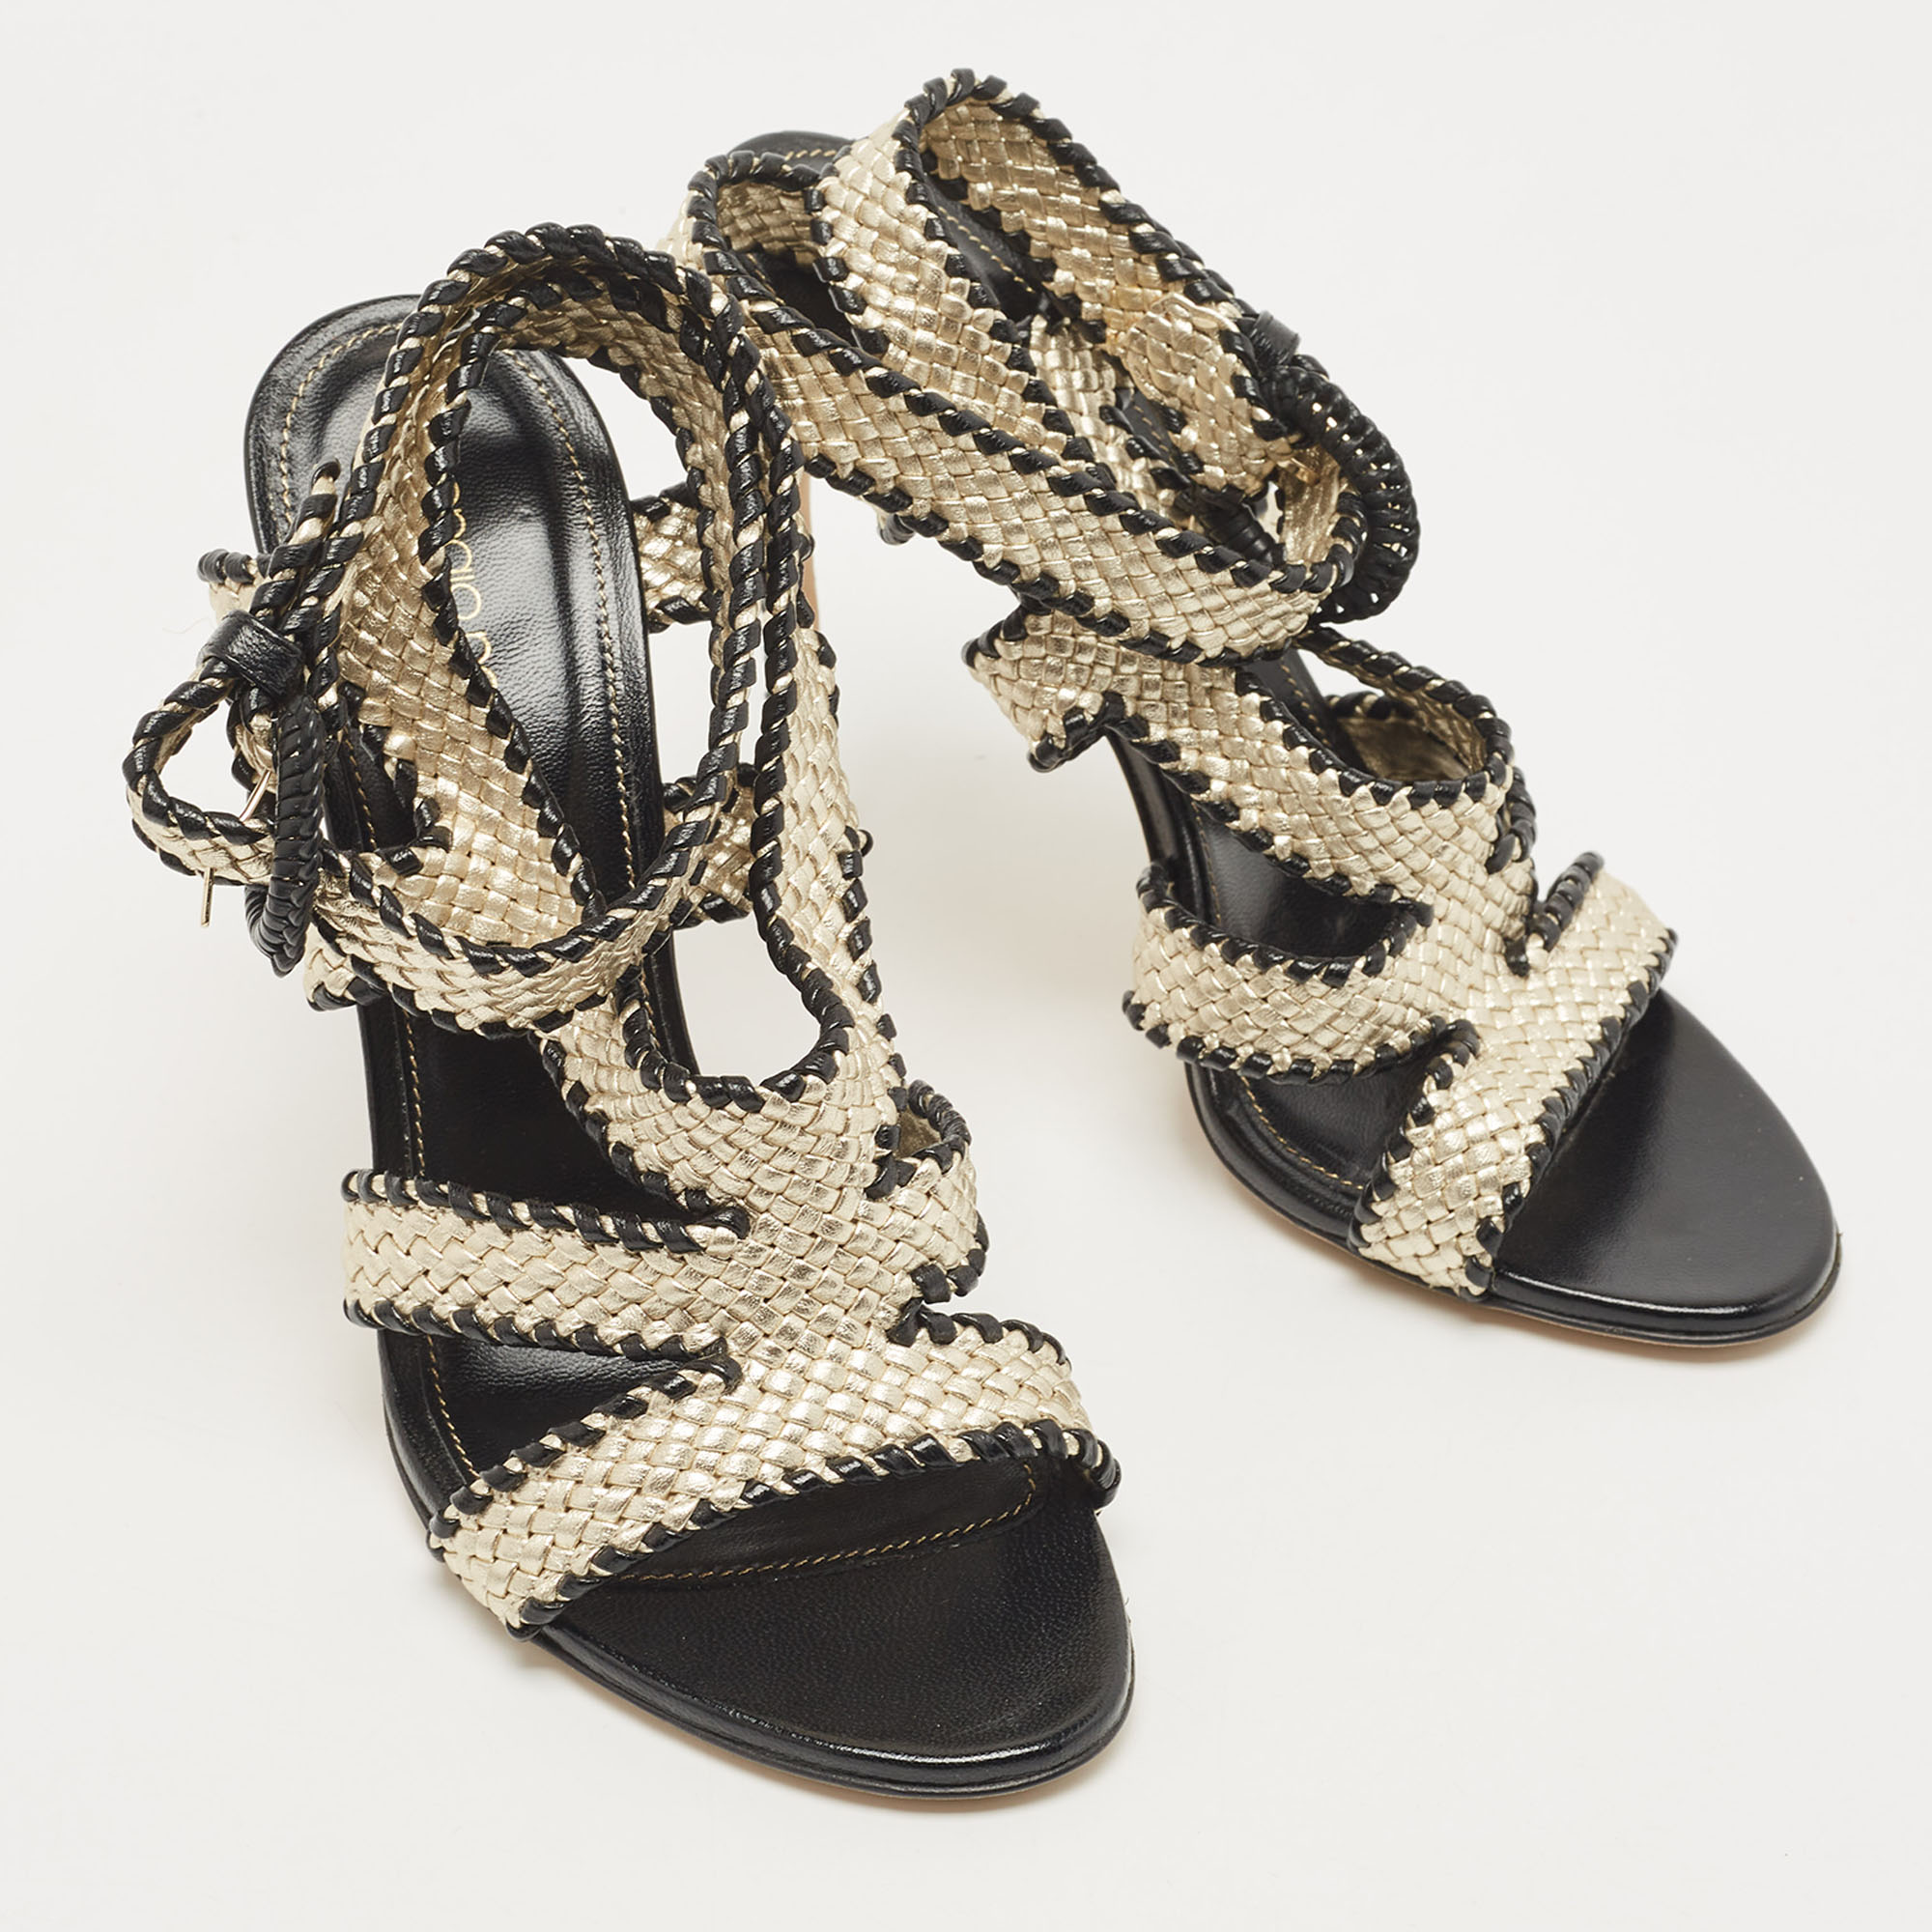 Sergio Rossi Two Tone Woven Leather Ankle Wrap Sandals Size 39